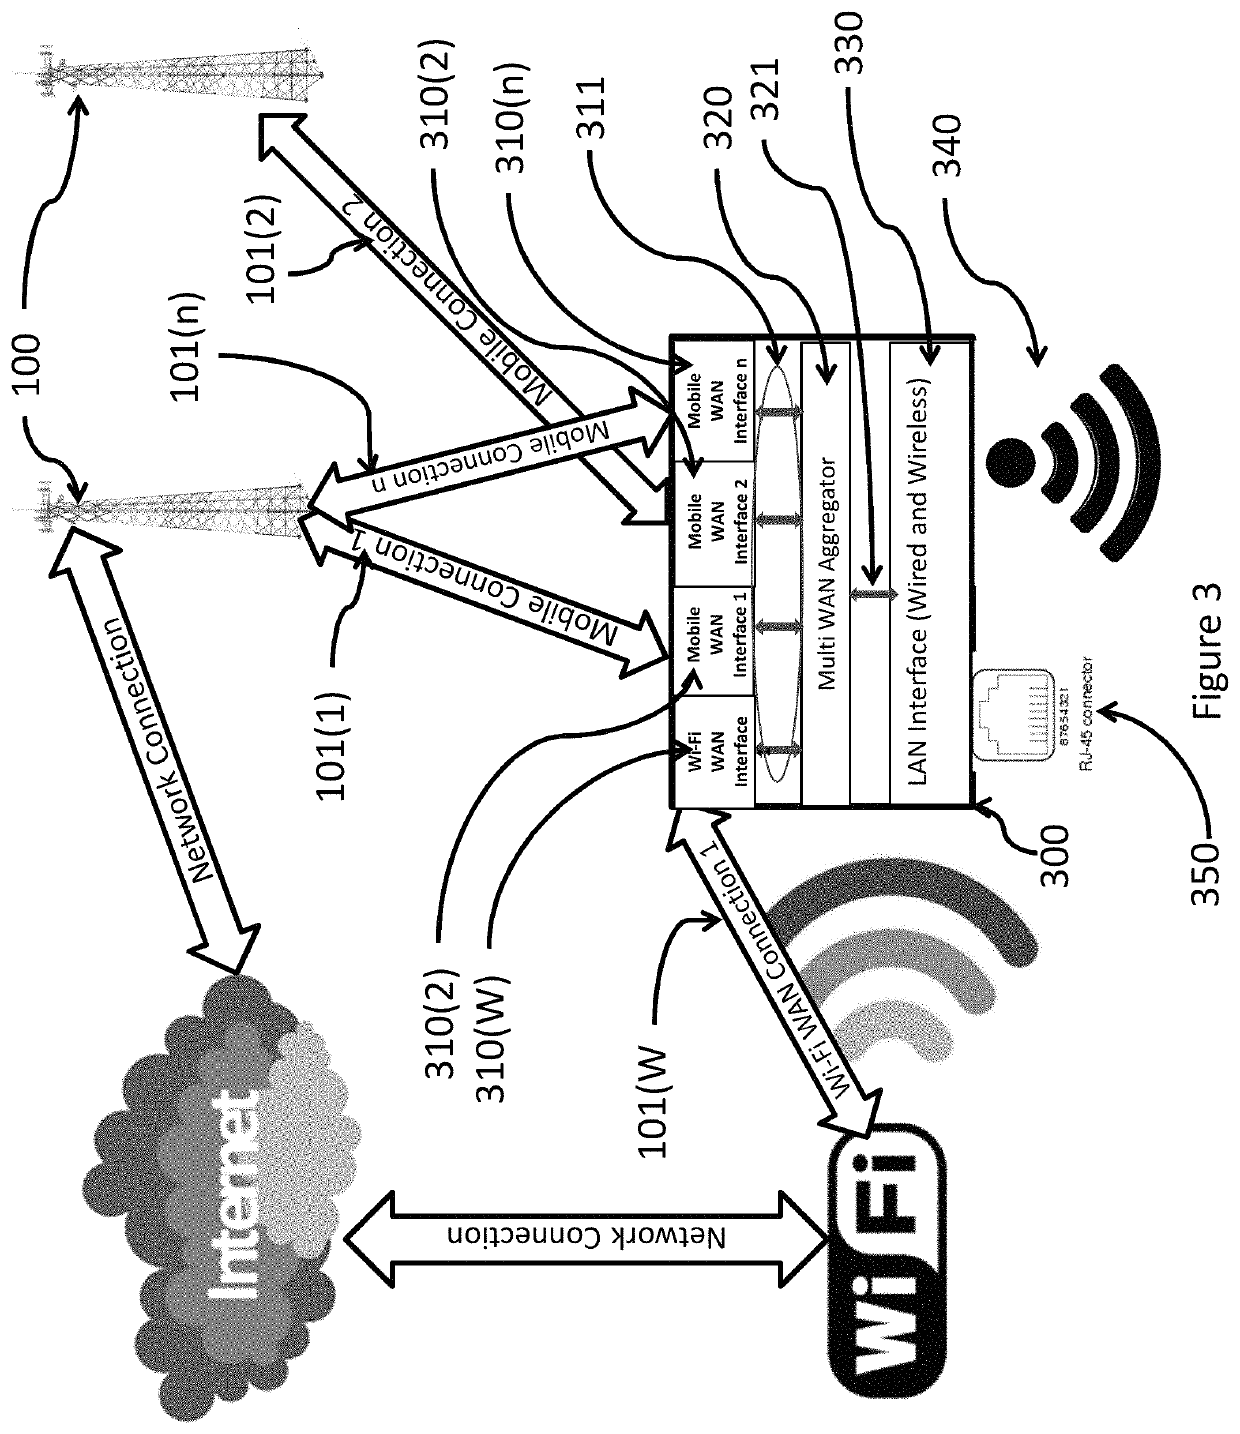 Systems and methods for performing data aggregation in wide area networks